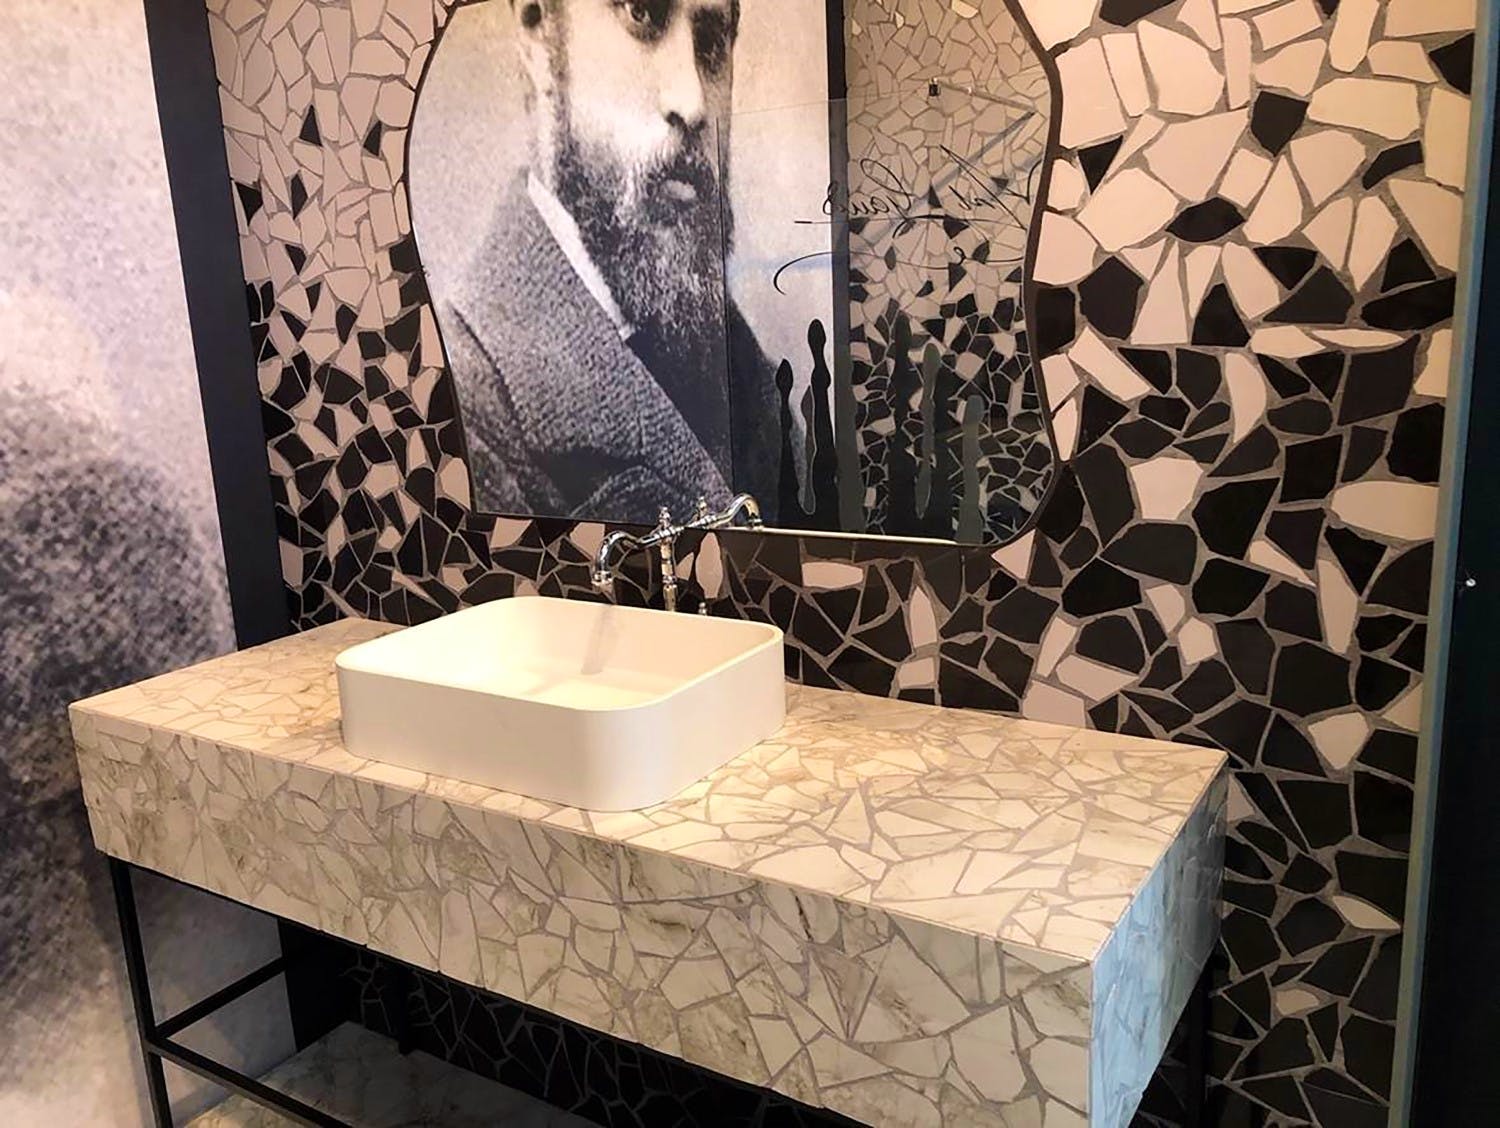 Image of Stand Cosentino Cersaie 2019 2 baja 4 in The Cosentino Group debuts at Cersaie 2019 as part of the "Famous Bathrooms" exhibition - Cosentino